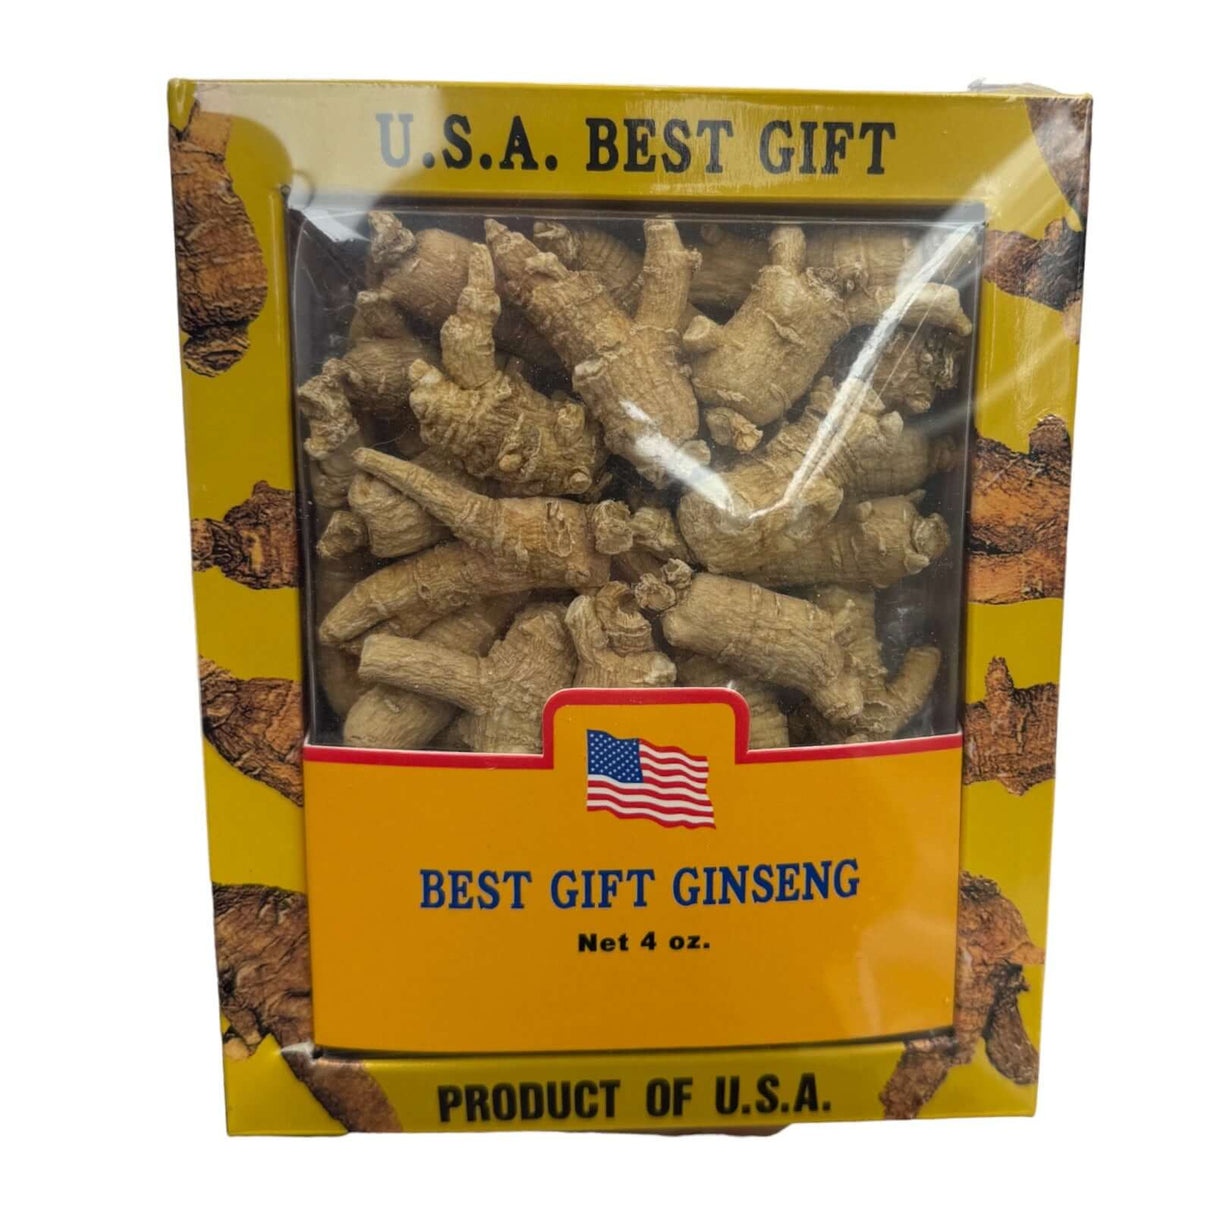 U.S.A. Best Gift Ginseng Whole